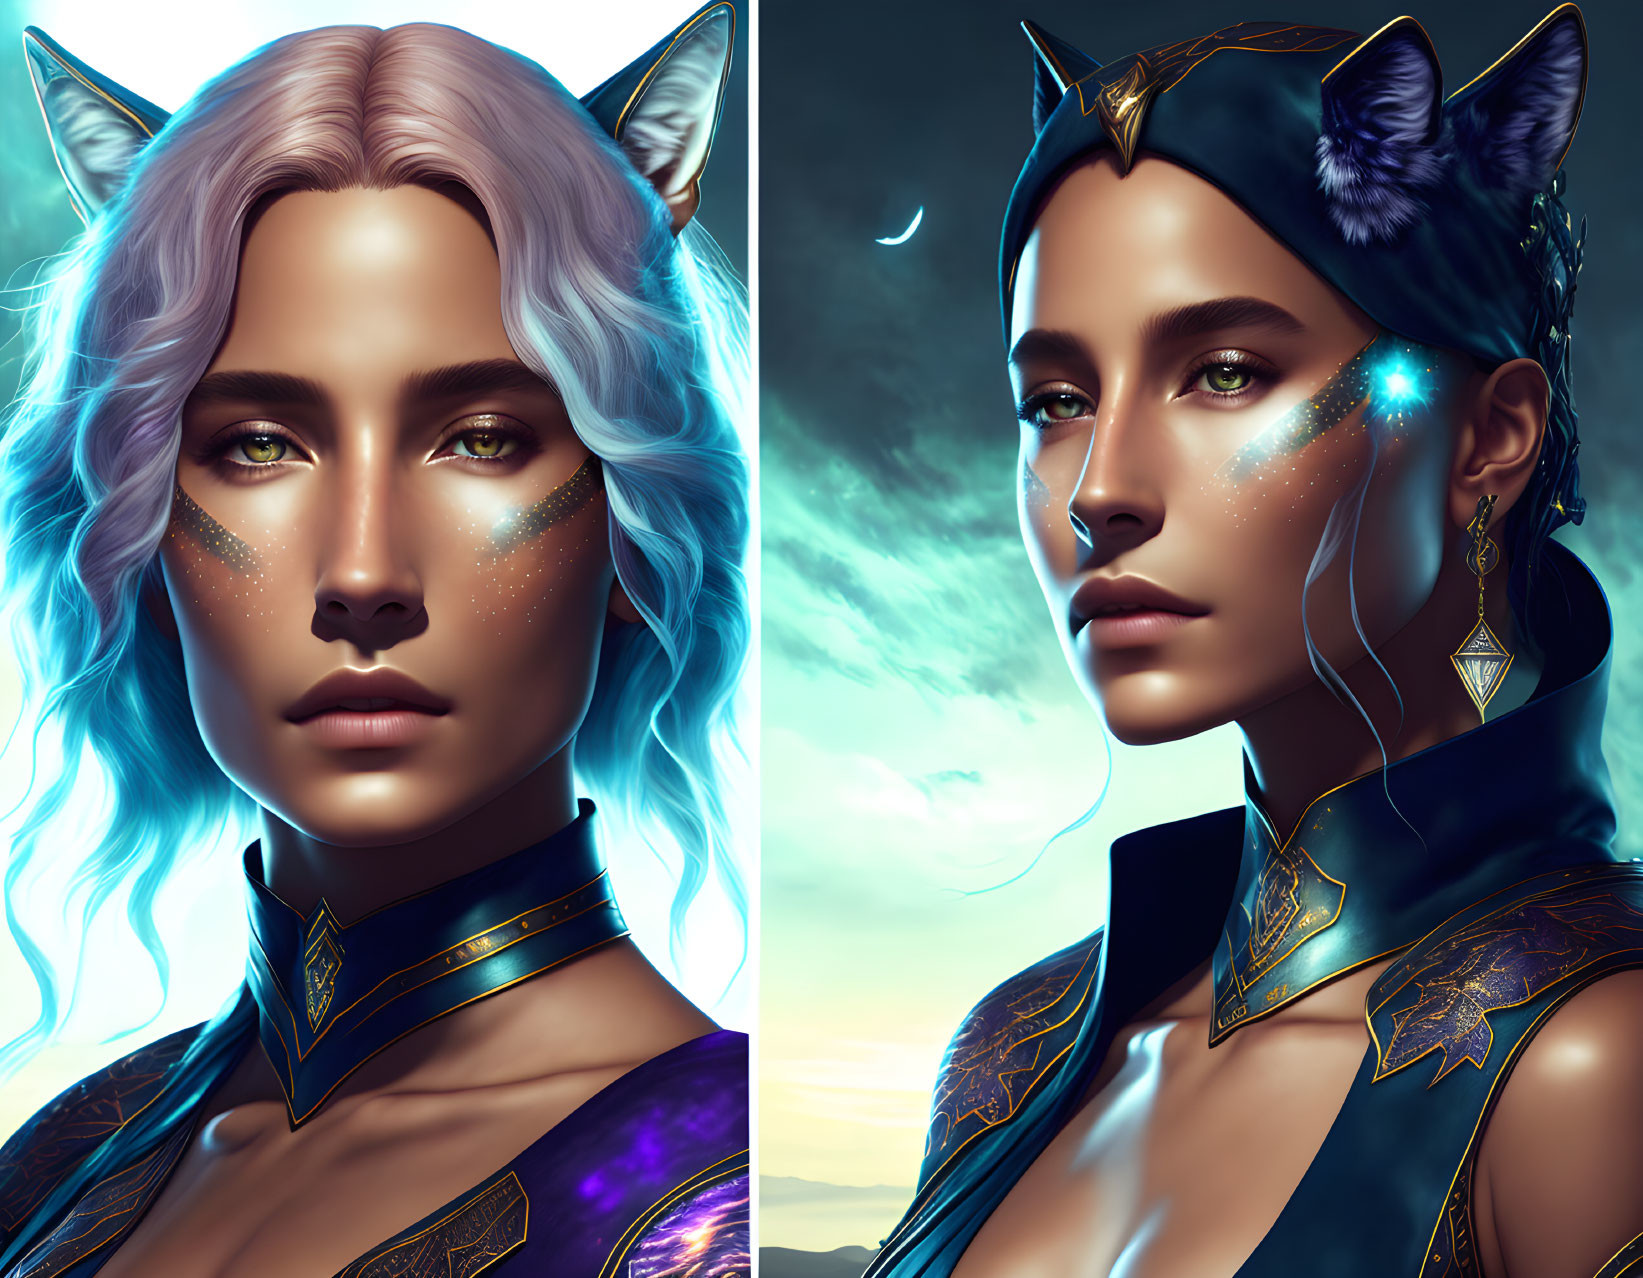 Fantasy-themed portraits of a woman with feline ears and blue hair.